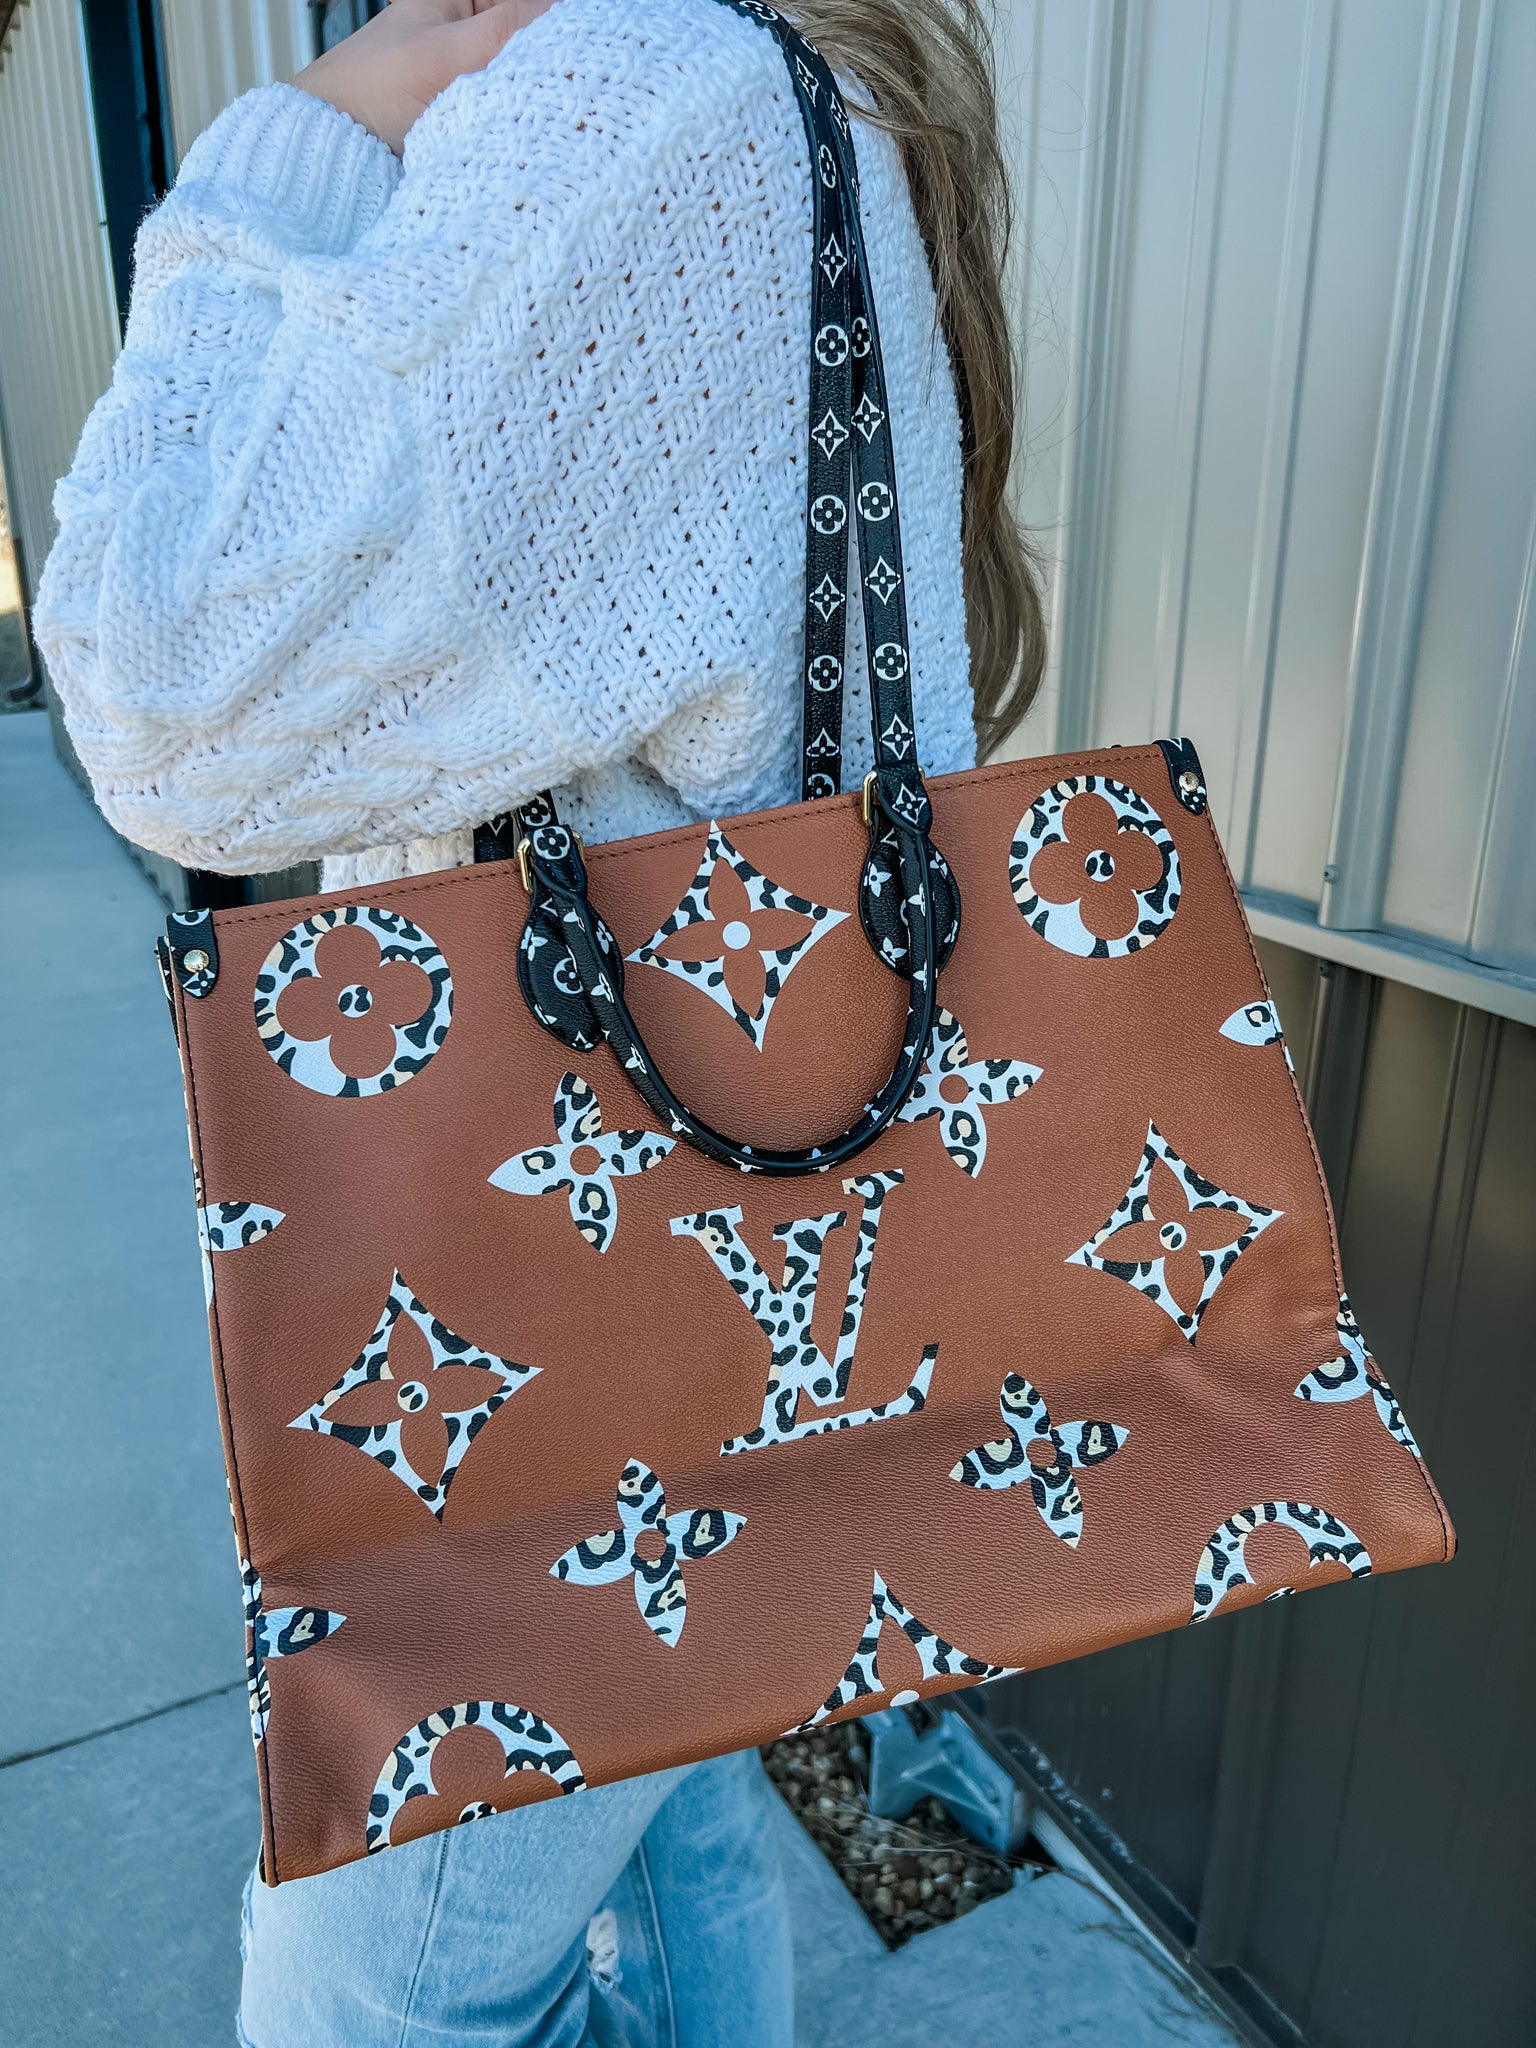 IN STOCK Onthego Leopard GM Tote